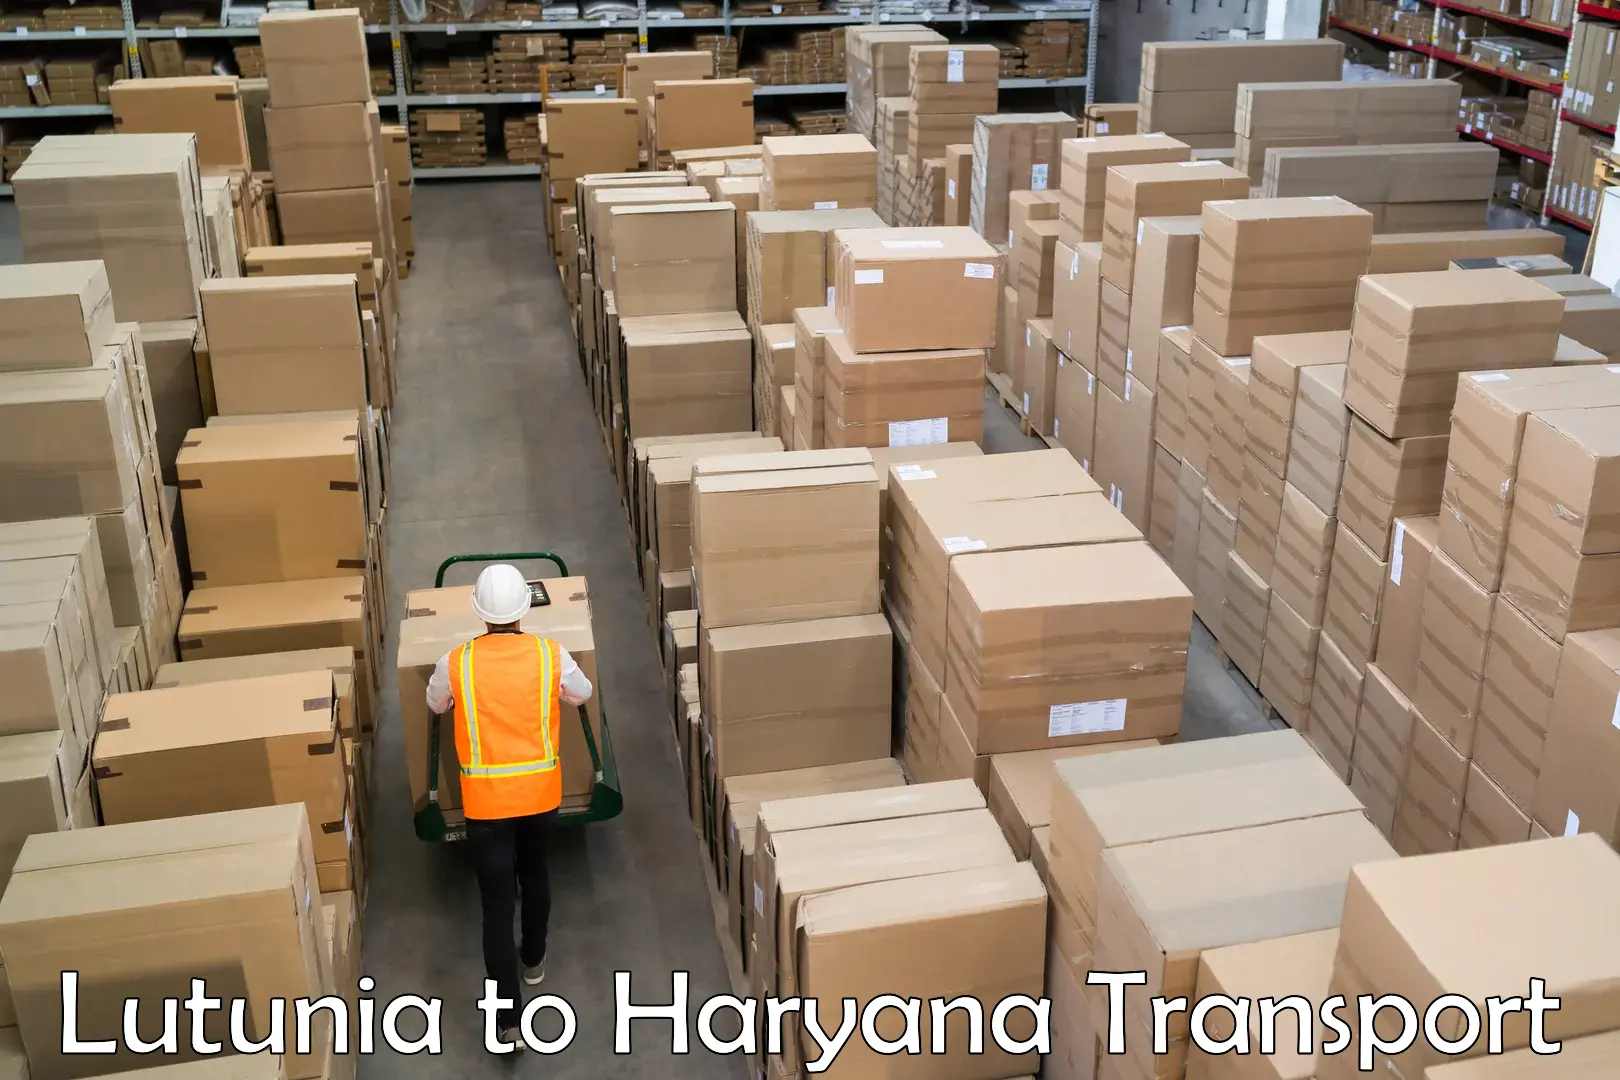 Domestic goods transportation services Lutunia to Chaudhary Charan Singh Haryana Agricultural University Hisar